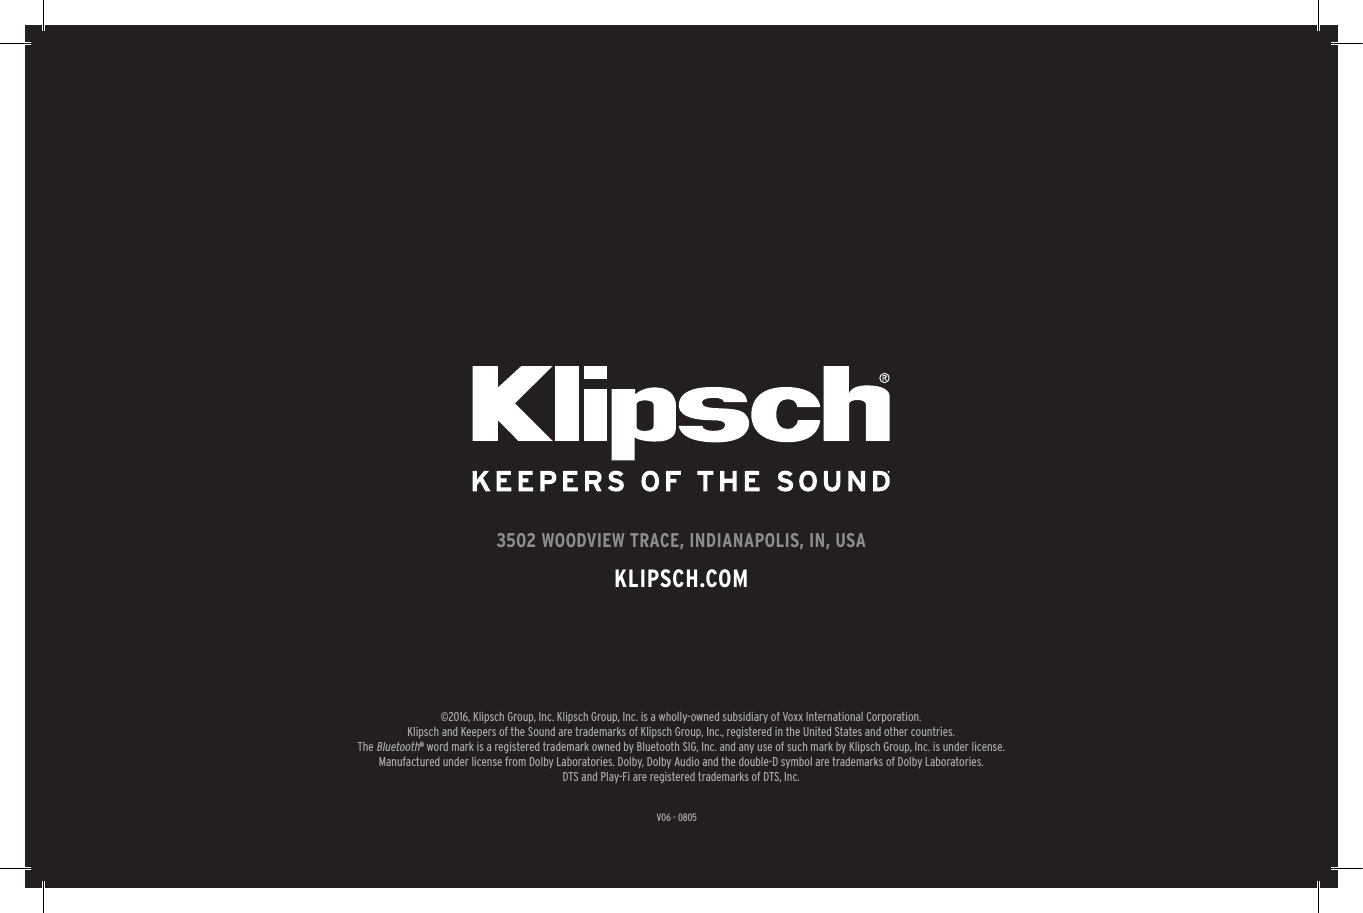 27V06 - 08053502 WOODVIEW TRACE, INDIANAPOLIS, IN, USAKLIPSCH.COM©2016, Klipsch Group, Inc. Klipsch Group, Inc. is a wholly-owned subsidiary of Voxx International Corporation.Klipsch and Keepers of the Sound are trademarks of Klipsch Group, Inc., registered in the United States and other countries.The Bluetooth® word mark is a registered trademark owned by Bluetooth SIG, Inc. and any use of such mark by Klipsch Group, Inc. is under license. Manufactured under license from Dolby Laboratories. Dolby, Dolby Audio and the double-D symbol are trademarks of Dolby Laboratories.DTS and Play-Fi are registered trademarks of DTS, Inc.